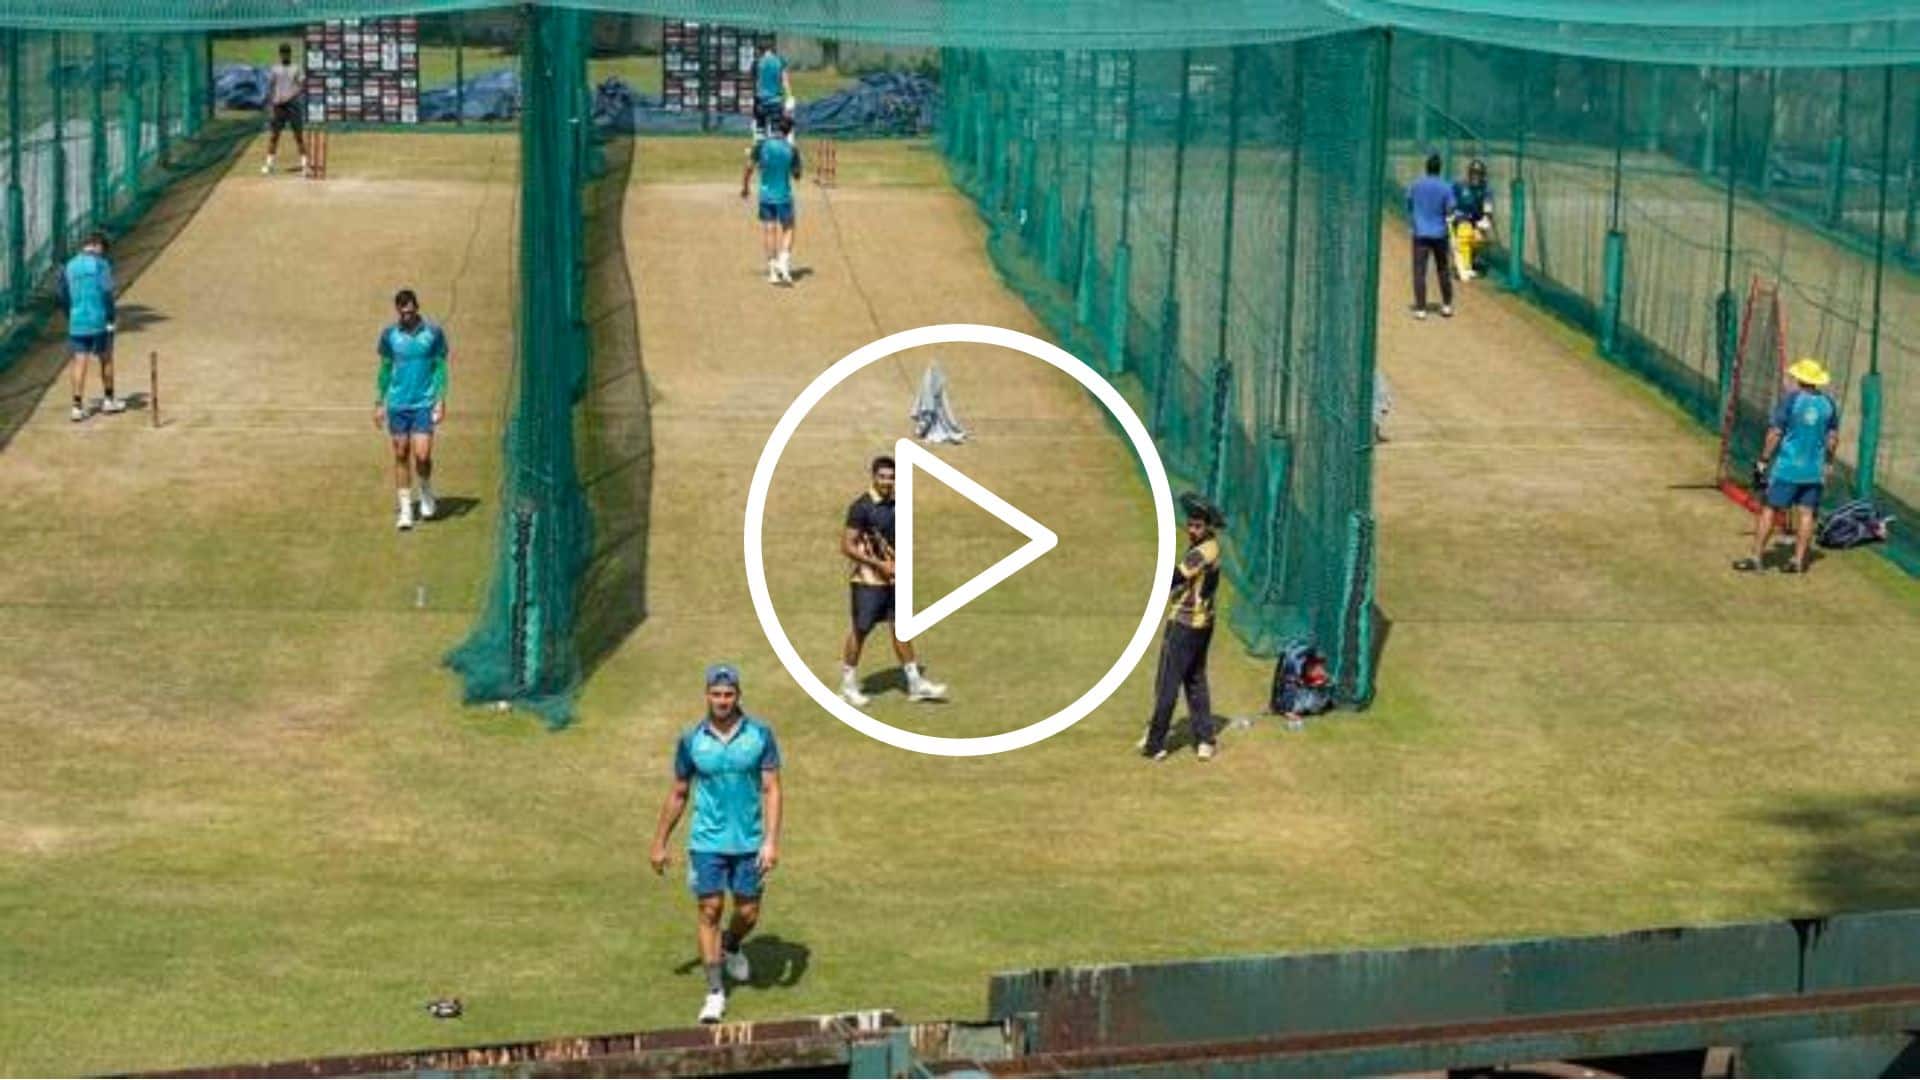 Net Bowler Sameer Khan Bamboozles Marcus Stoinis In Nets Ahead Of ODIs